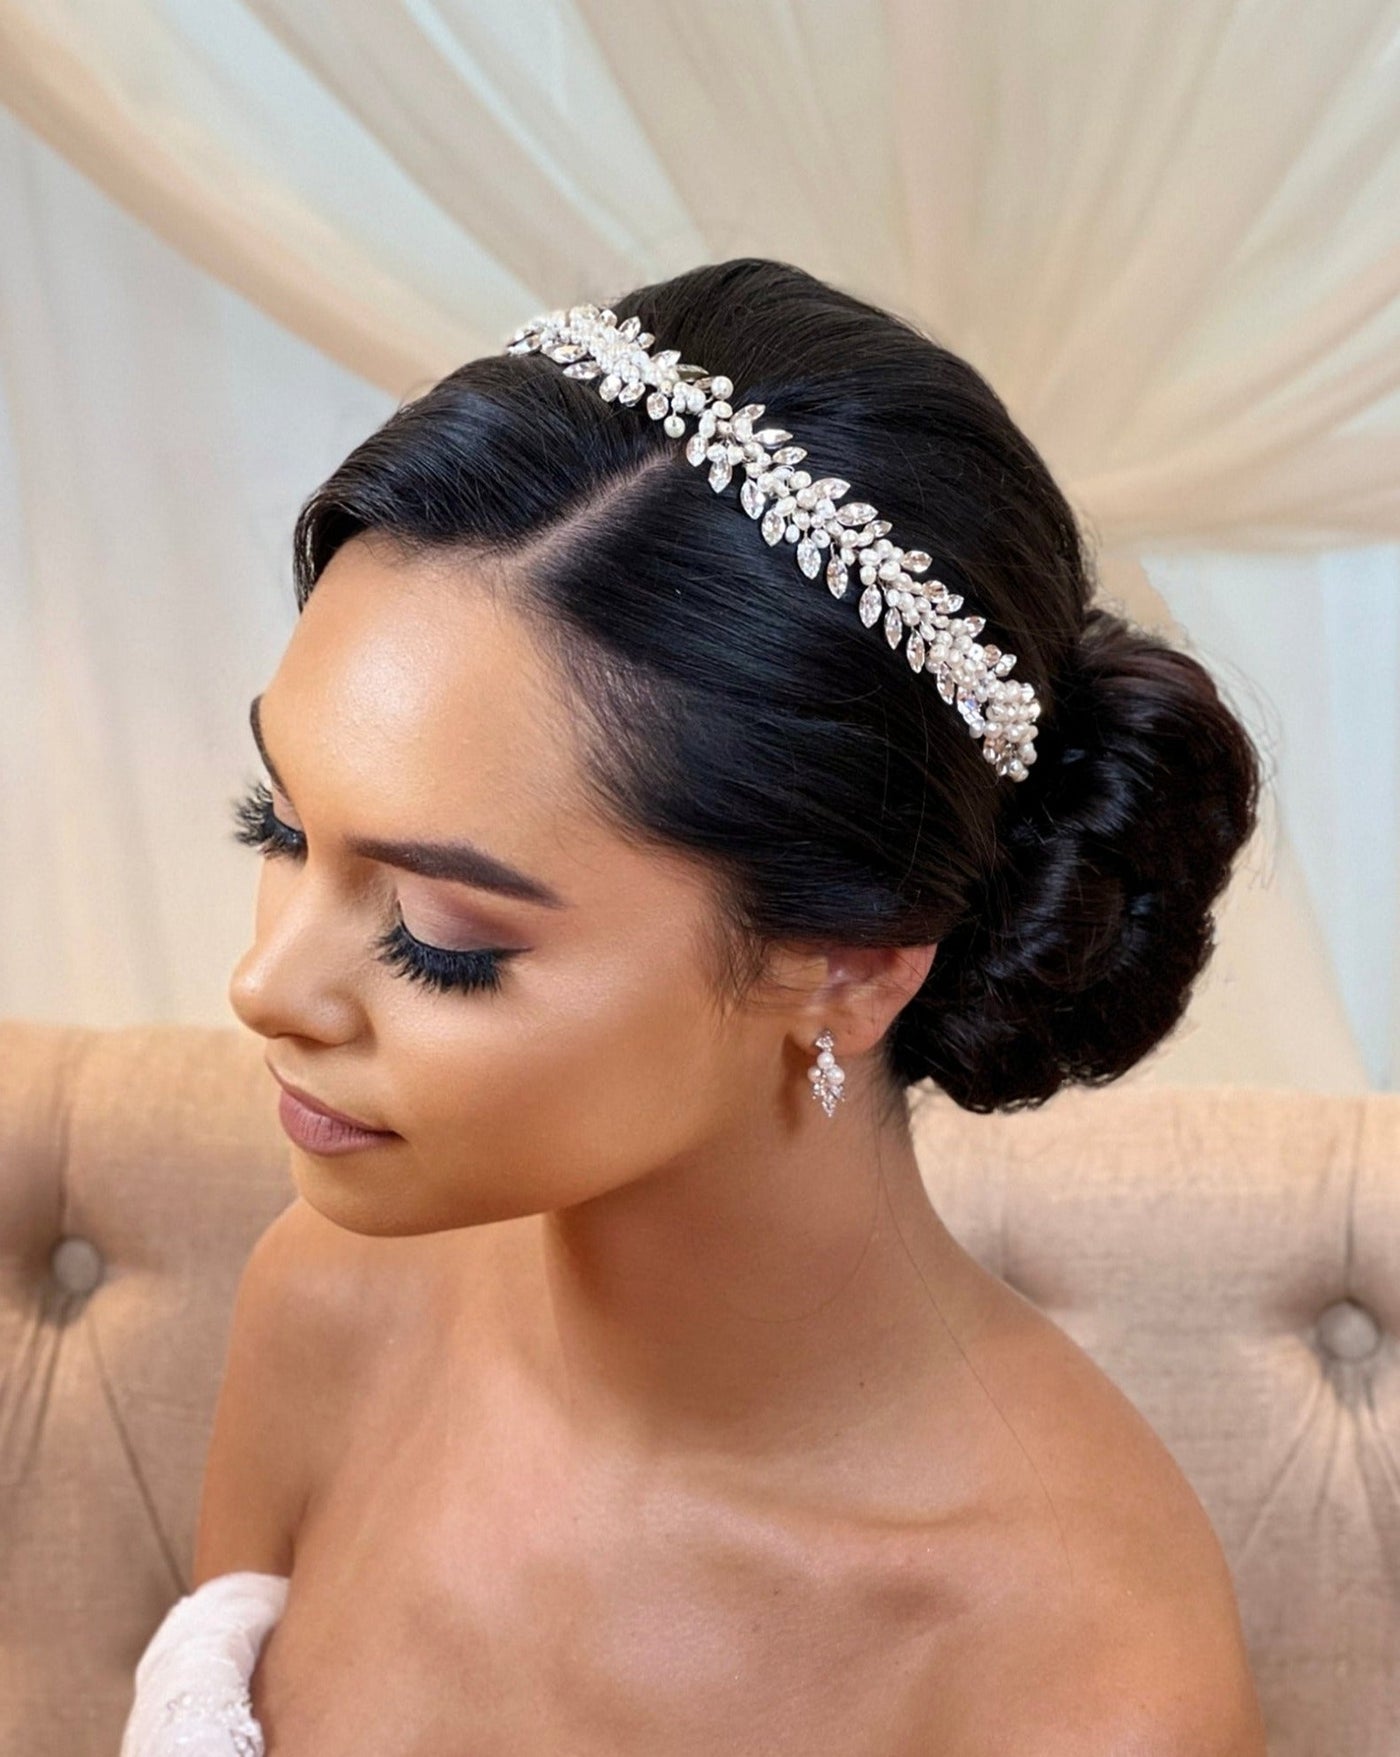 female model wearing bridal hair vine with small round crystals and pearls